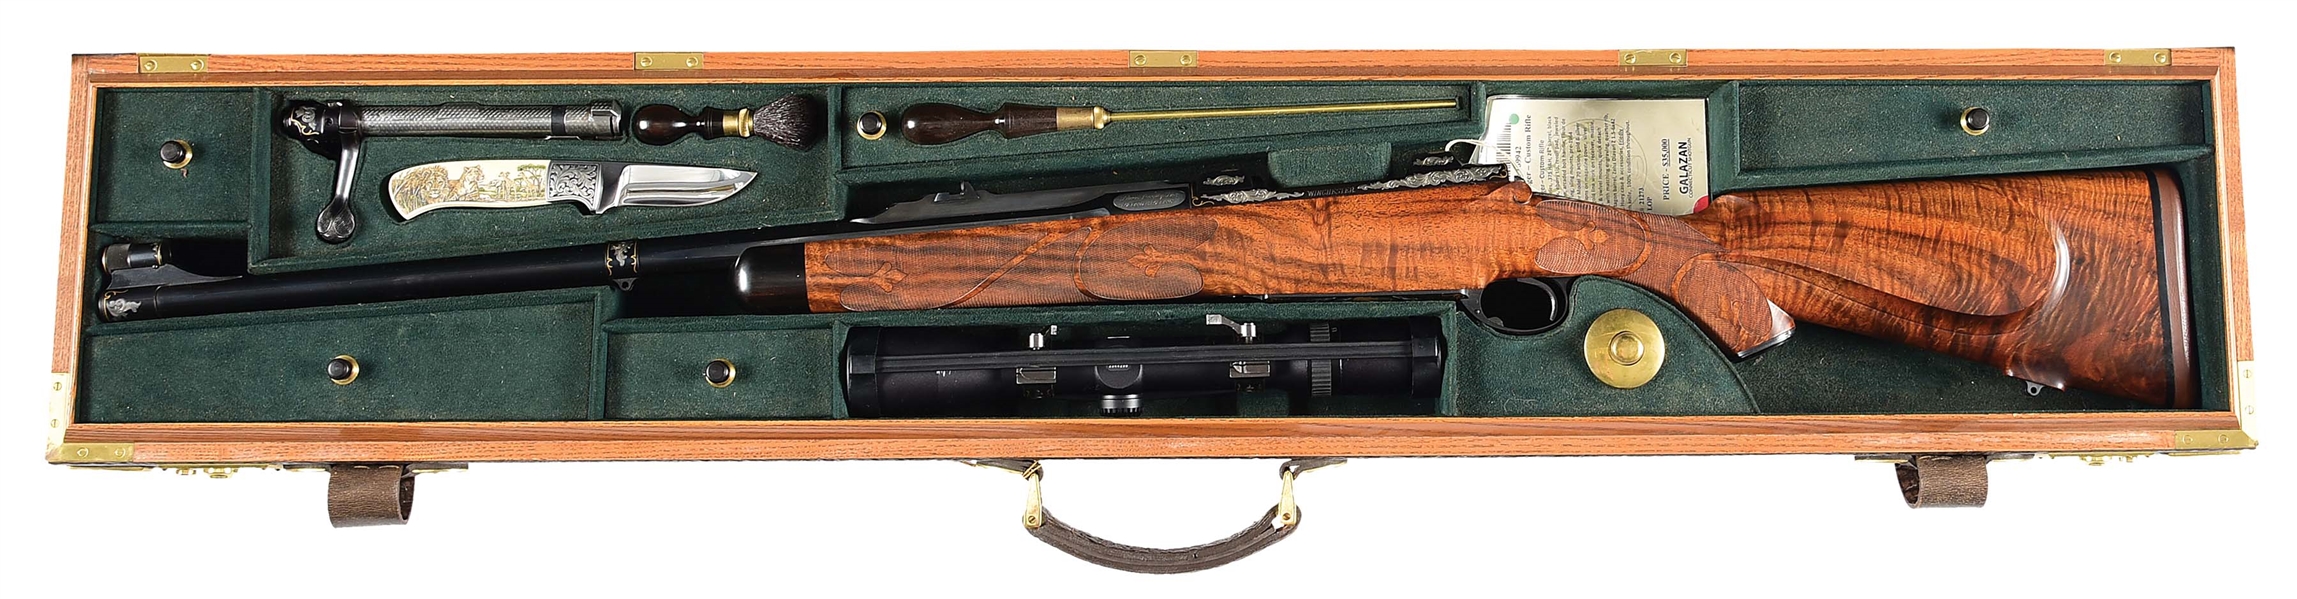 (M) BOLLIGER SIGNATURE SERIES RIFLE IN .375 H&H MAGNUM WITH CASE.